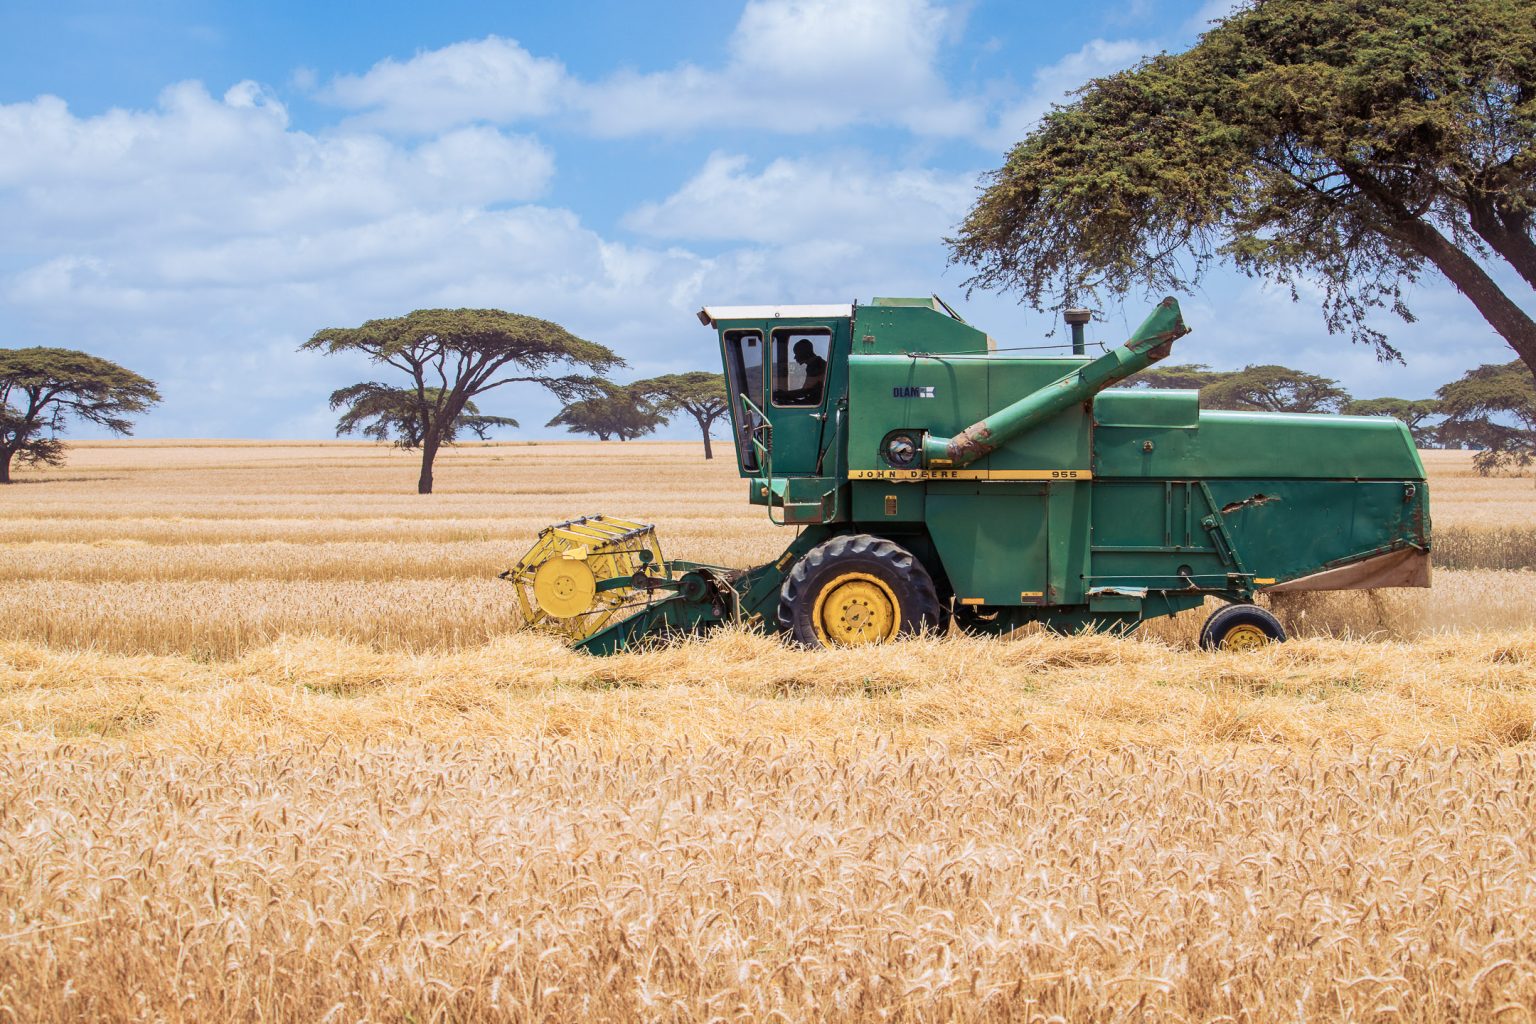 Wheat harvesting in Kenya. Africa can stop relying on importing food if it invests in its agricultural sector. www.theexchange.africa